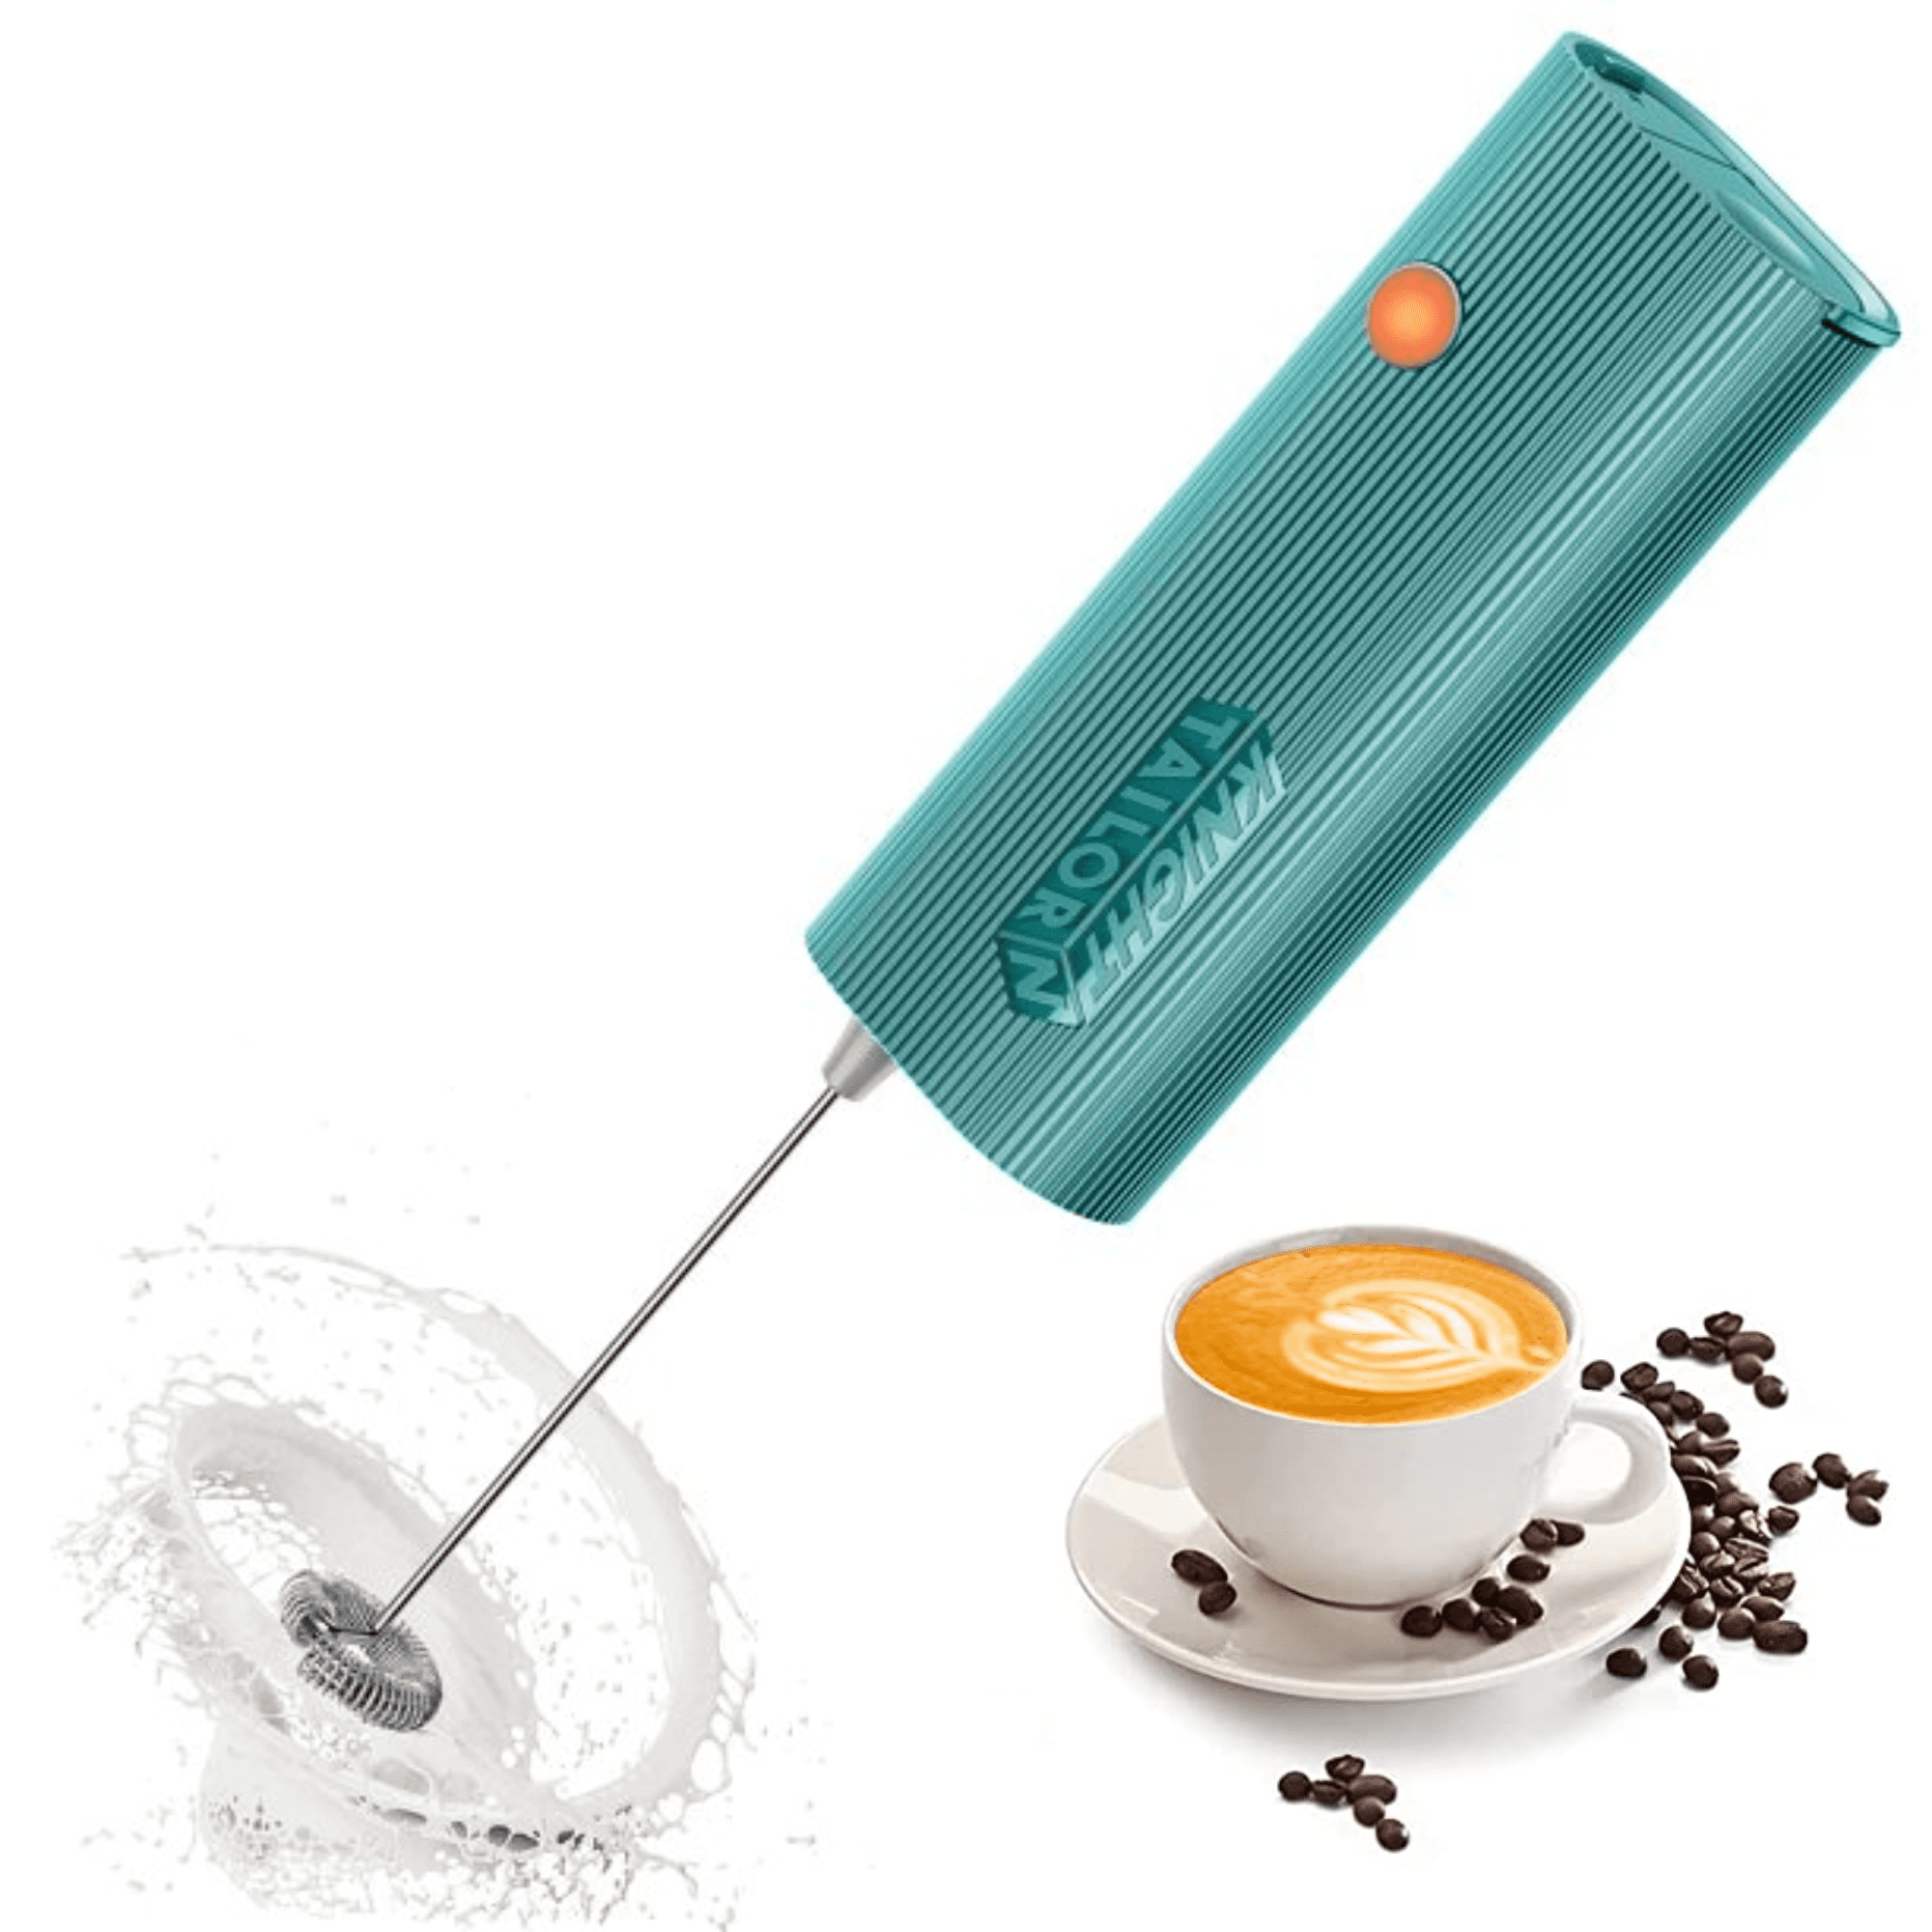 Zulay Skinny Milk Frother Handheld Mini Mixer - Stainless Steel Coffee  Frother Electric Handheld Frother For Coffee, Latte, Frappe - Cordless  Battery